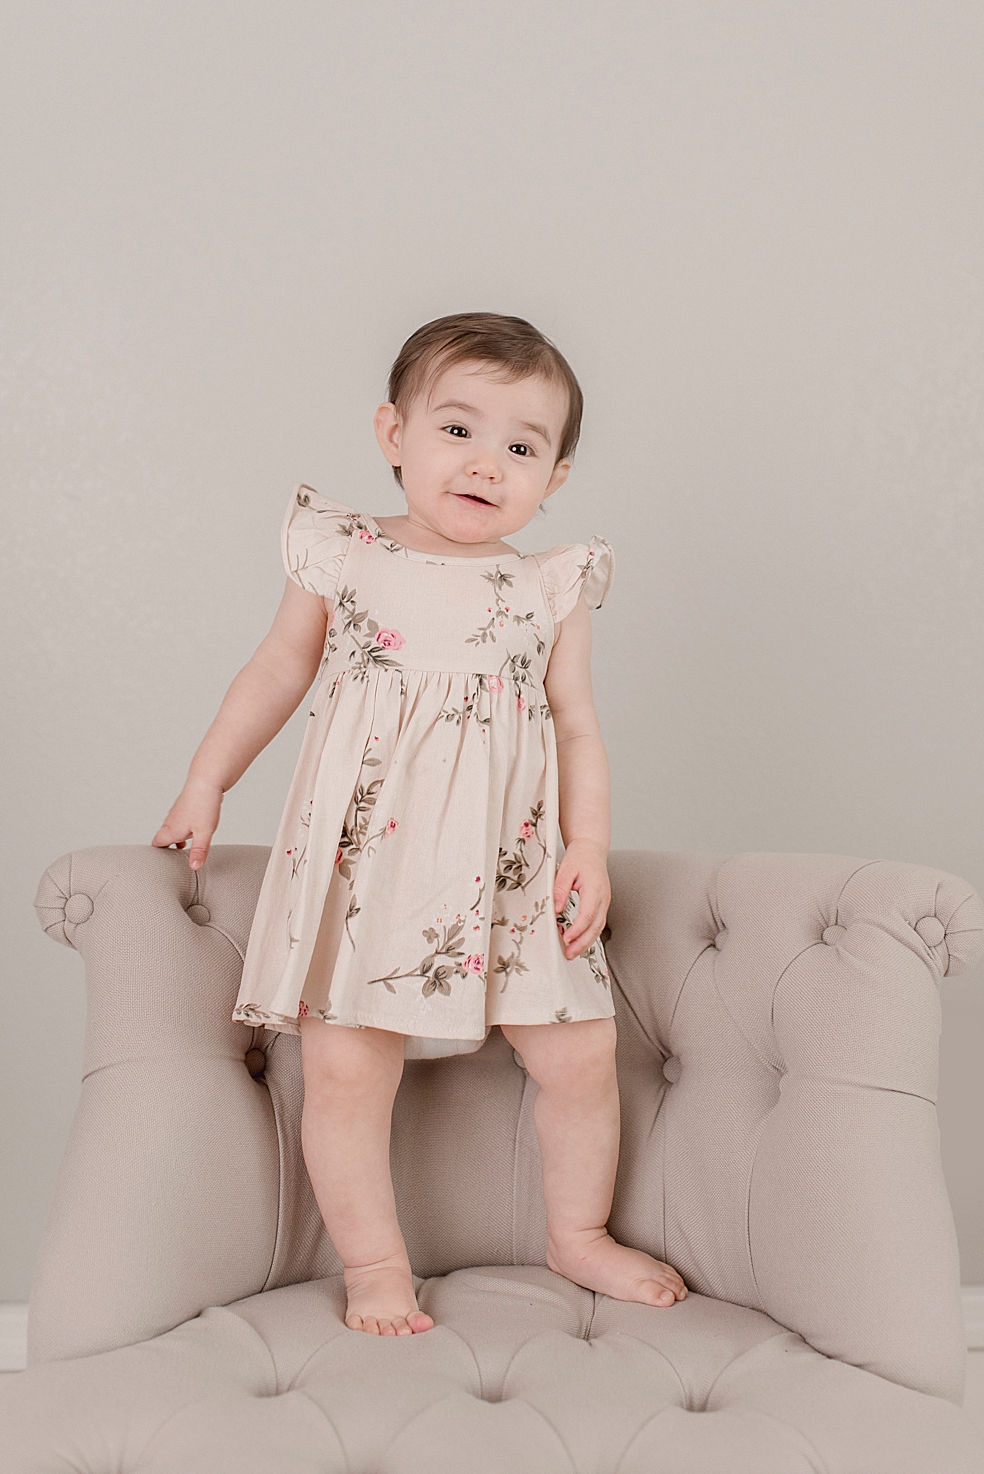 Baby girl in a floral print dress smiling | Photo by Jessica Lee Photography